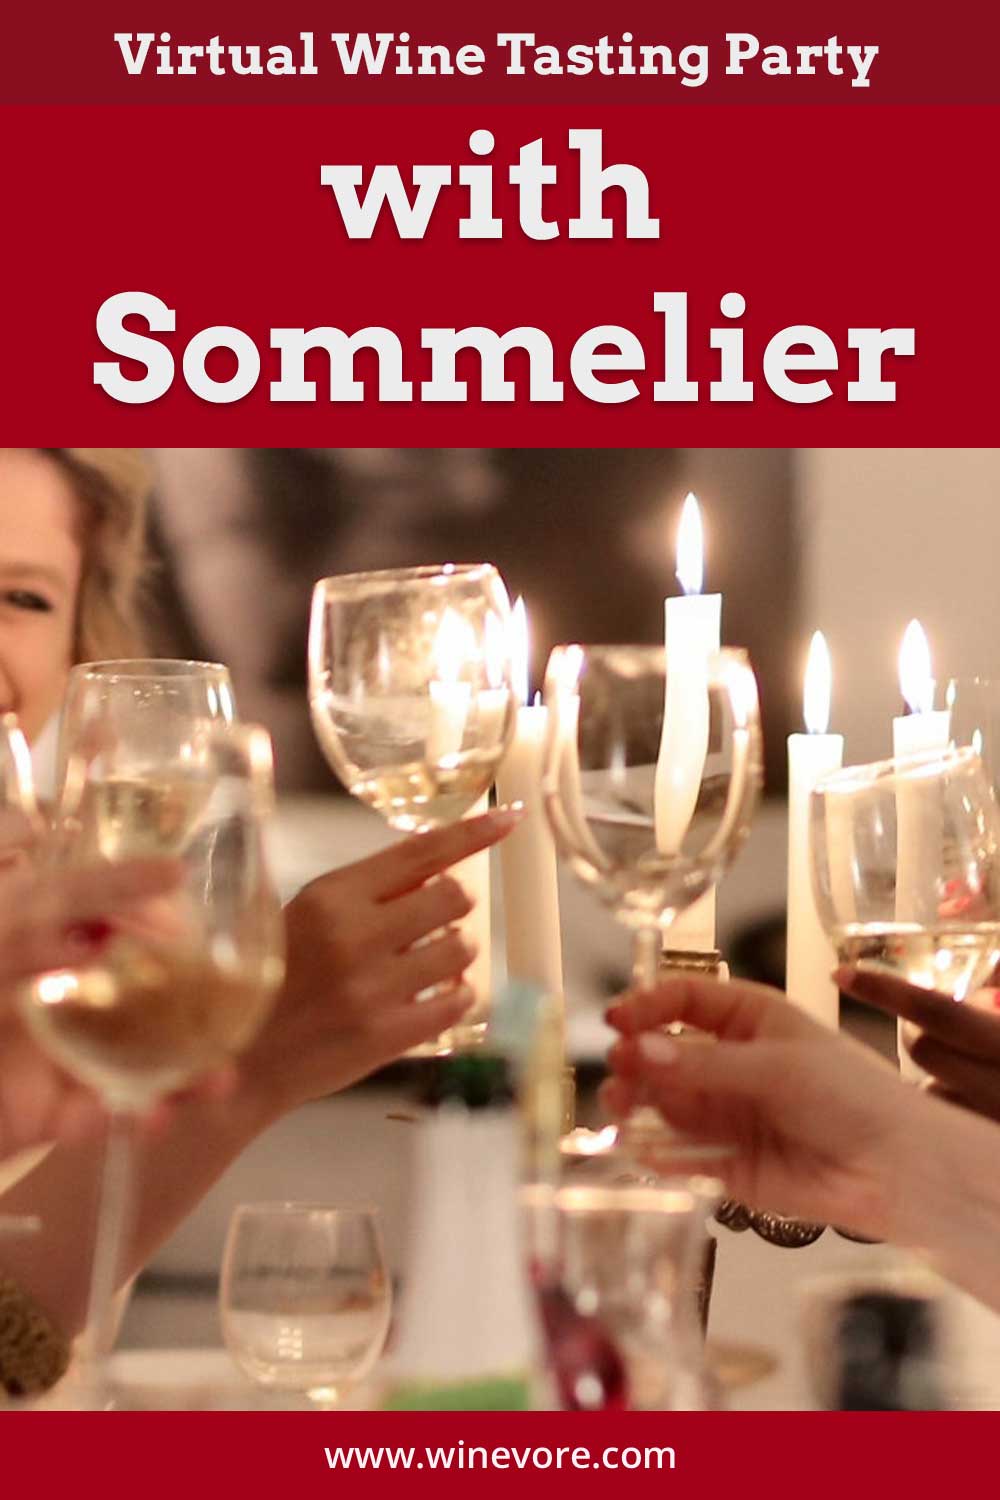 A group of people cheering up with wine glass and flaming candles beside - Virtual Wine Tasting Party with Sommelier.